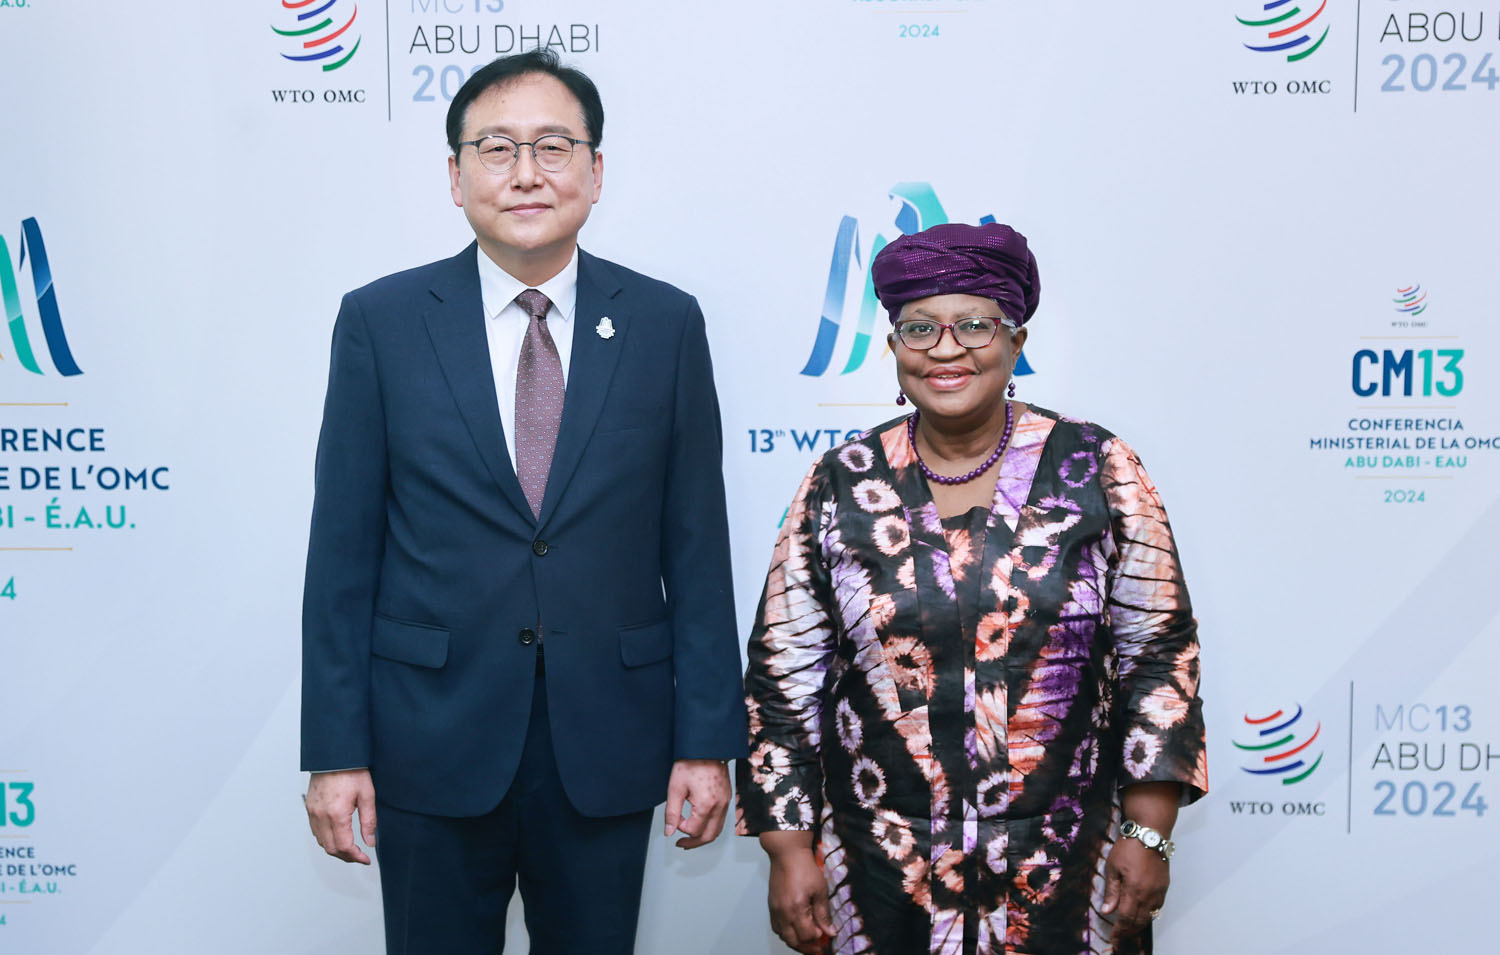 Trade Minister meets with WTO Director General